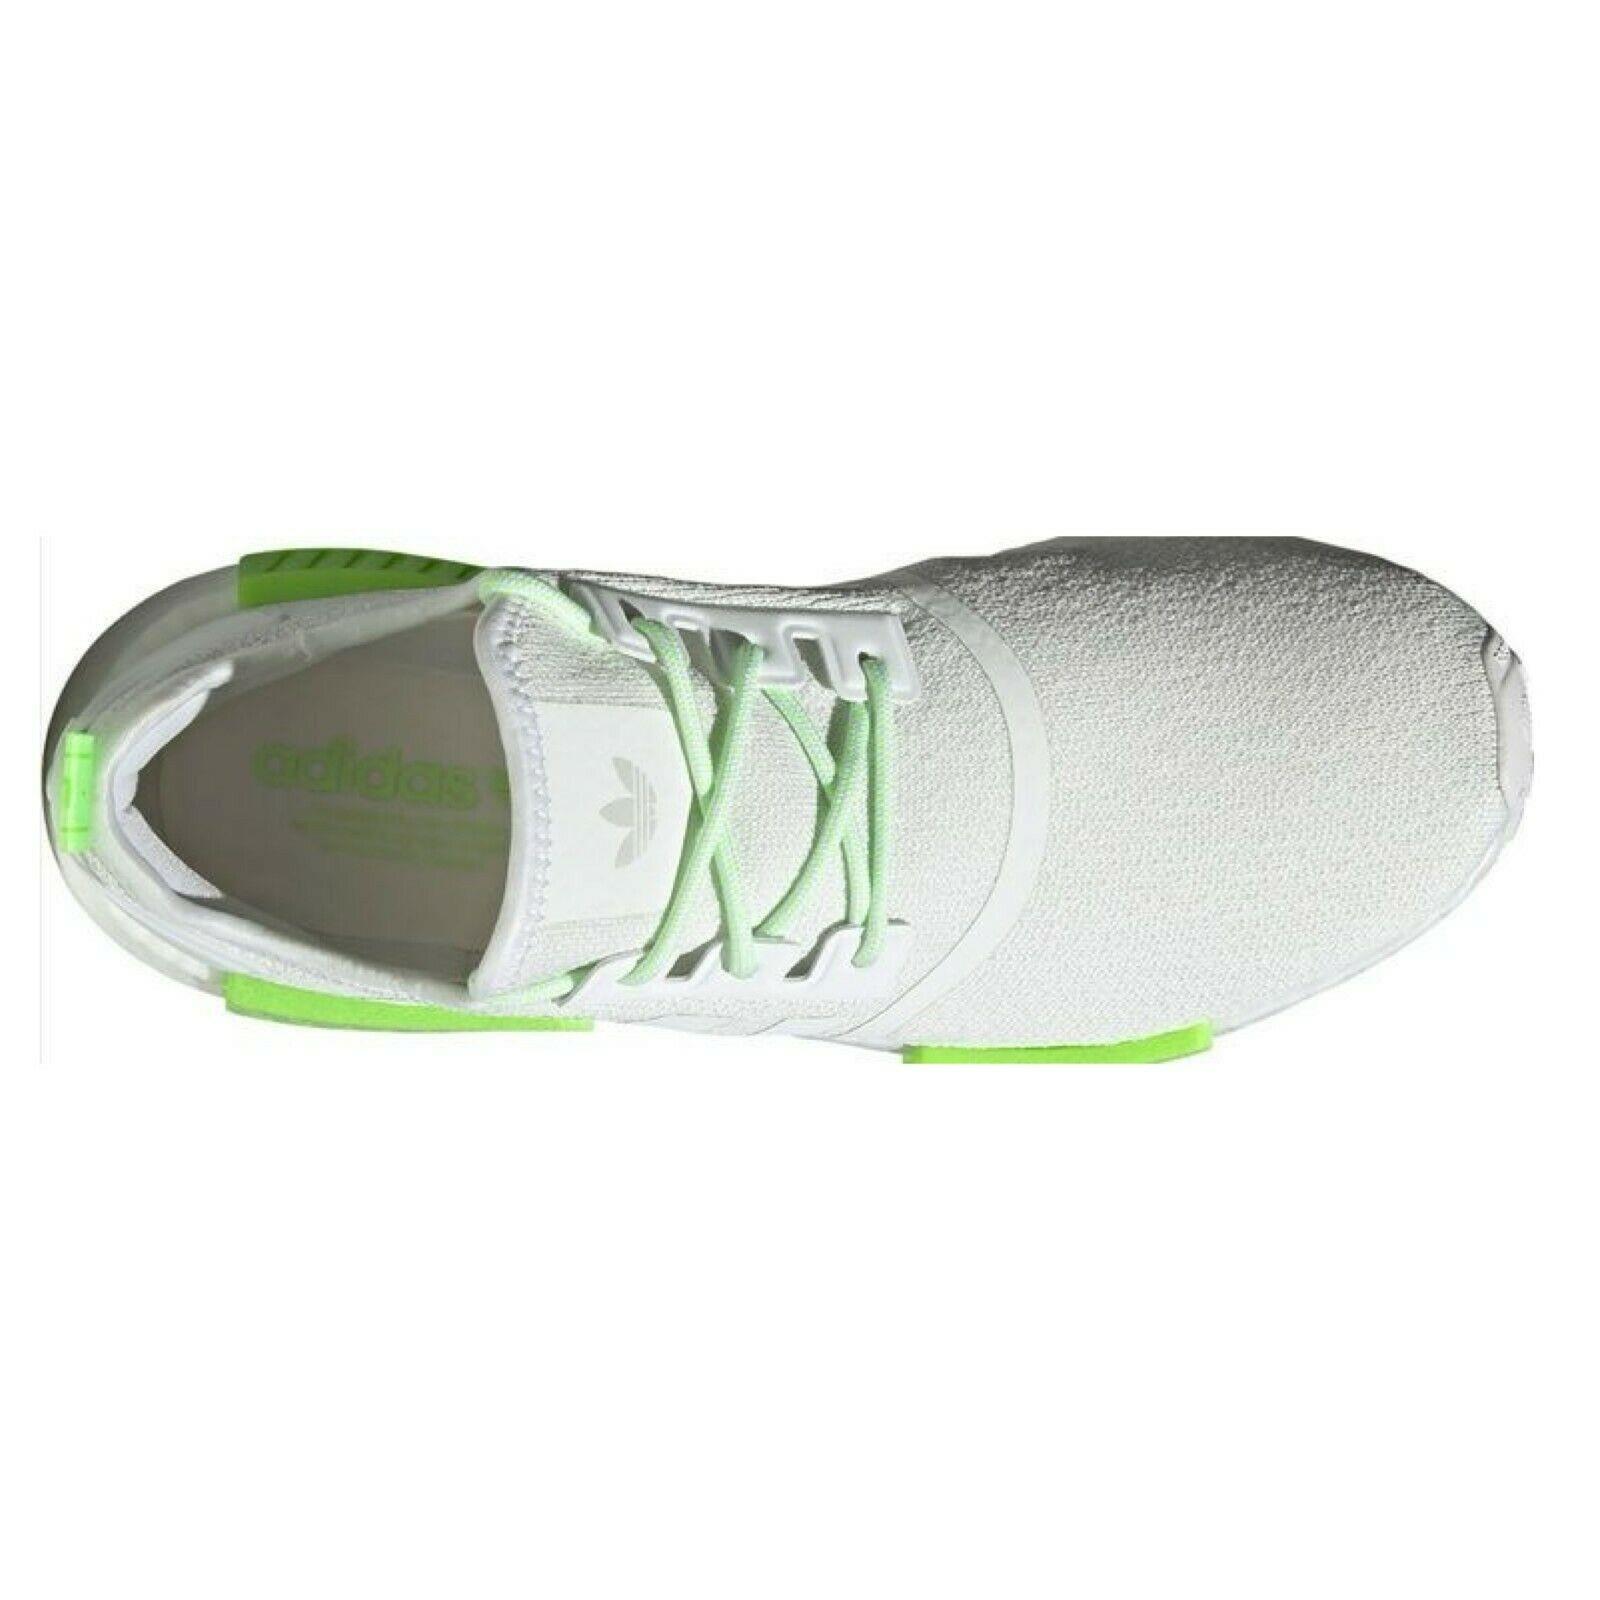 Adidas shoes NMD - Gray , GREY/NEON GREEN Manufacturer 2